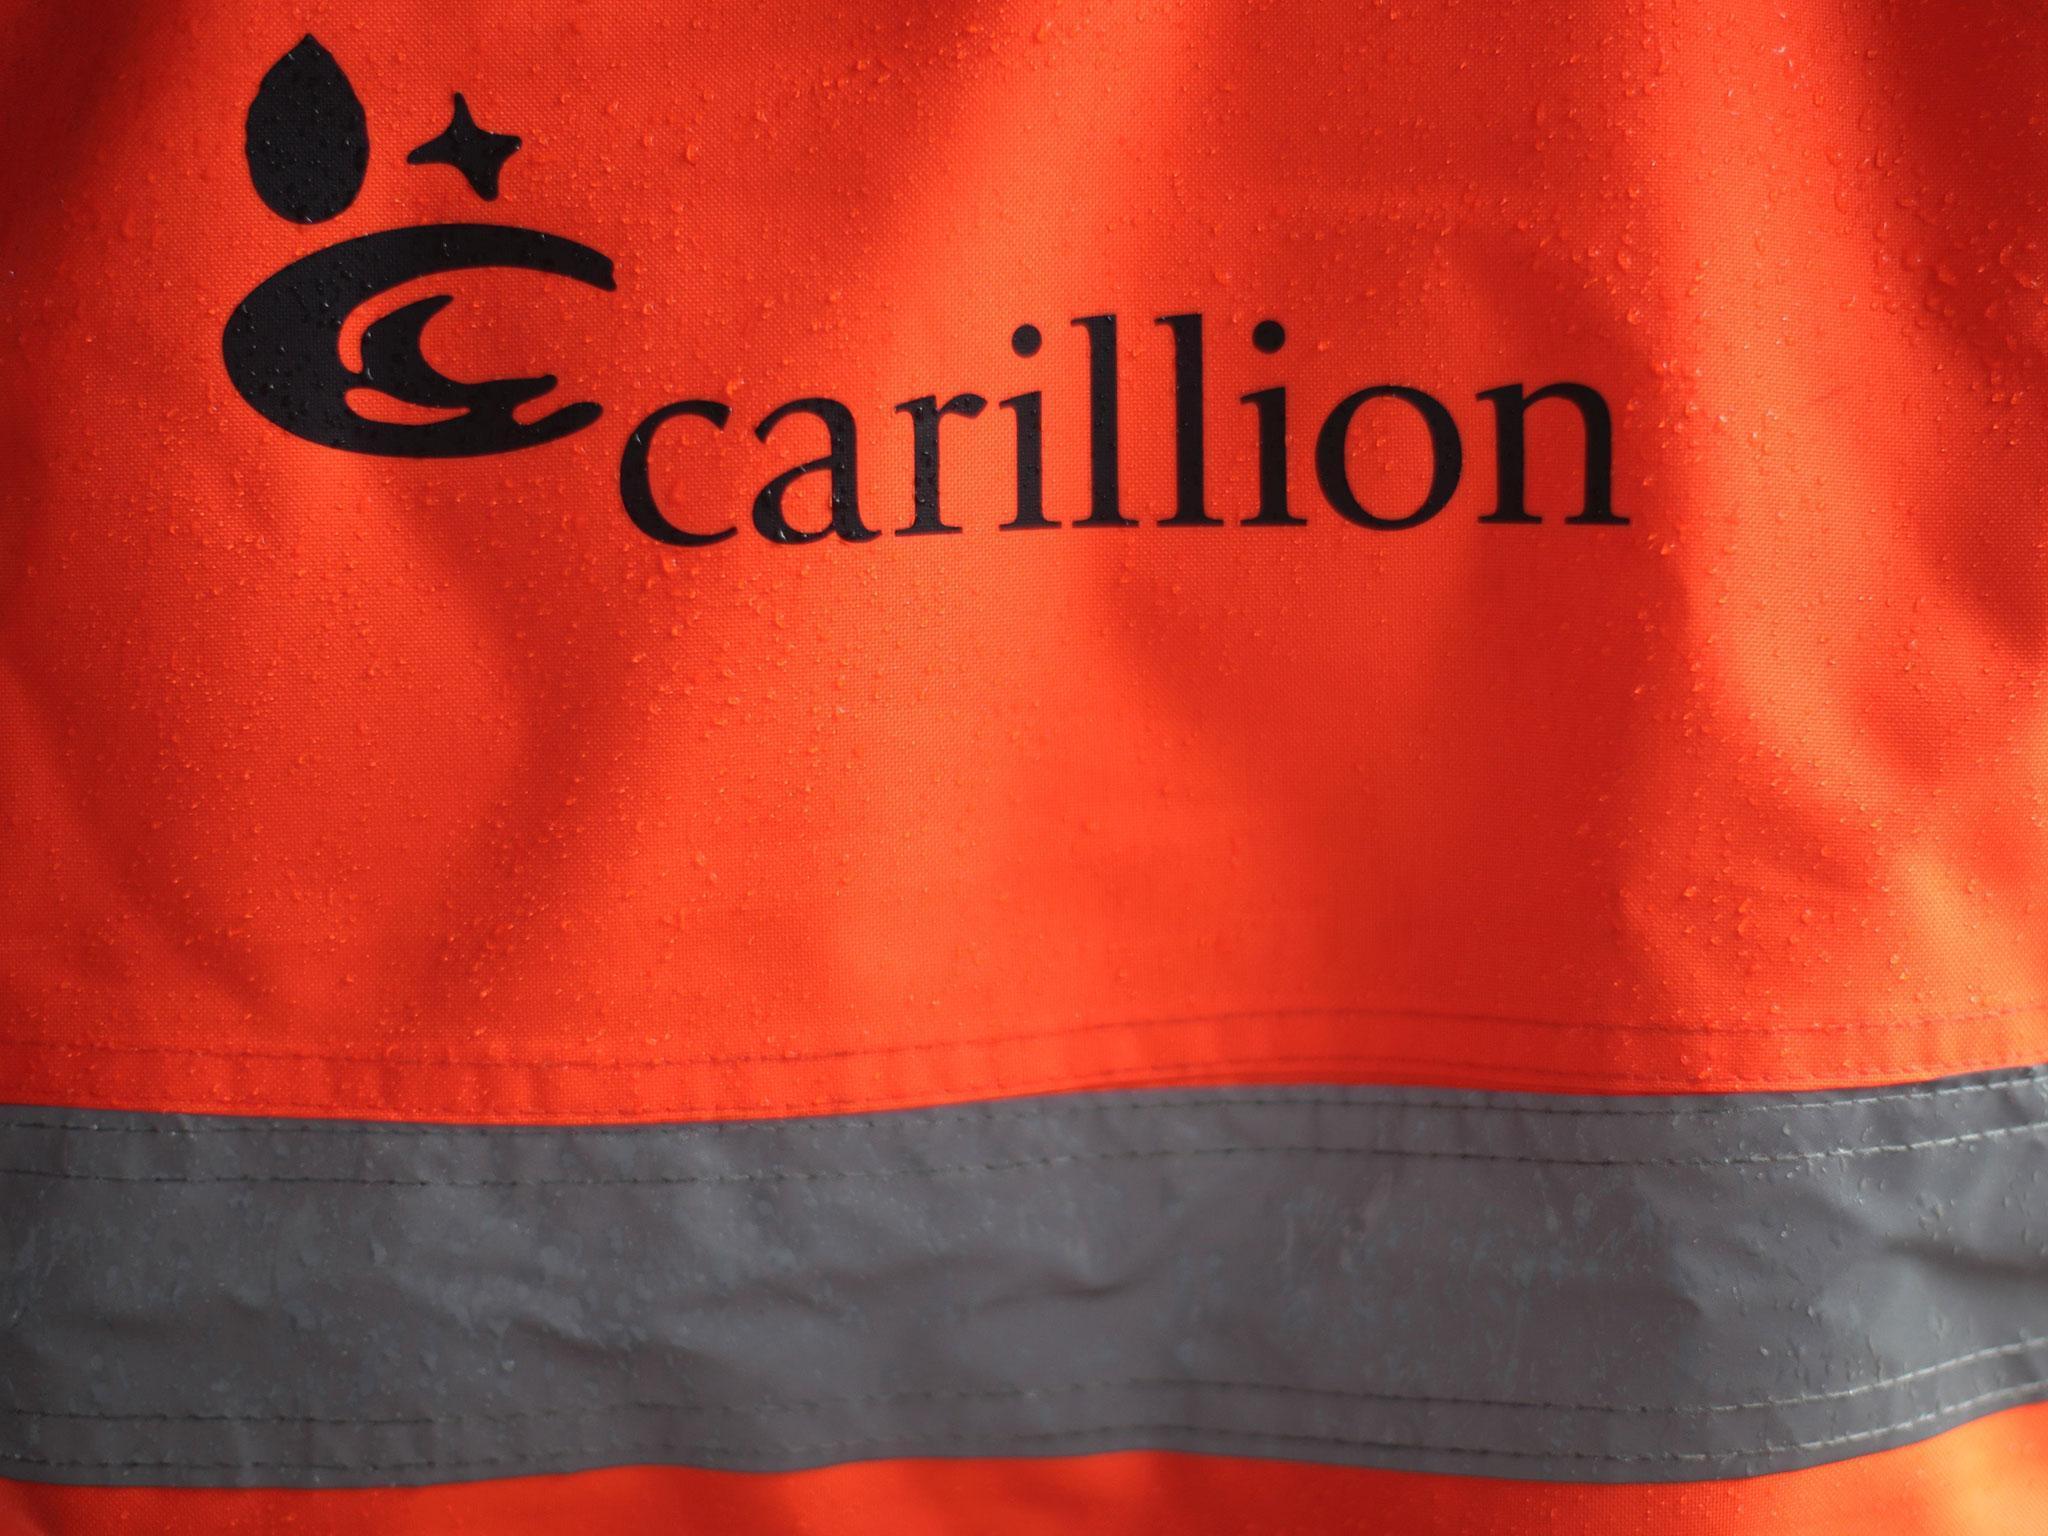 ‘The fact it was impossible to get a true sense of the assets, liabilities and cash generation of the business raises serious questions about Carillion’s corporate governance,’ says MP Rachel Reeves, chair of the Business committee